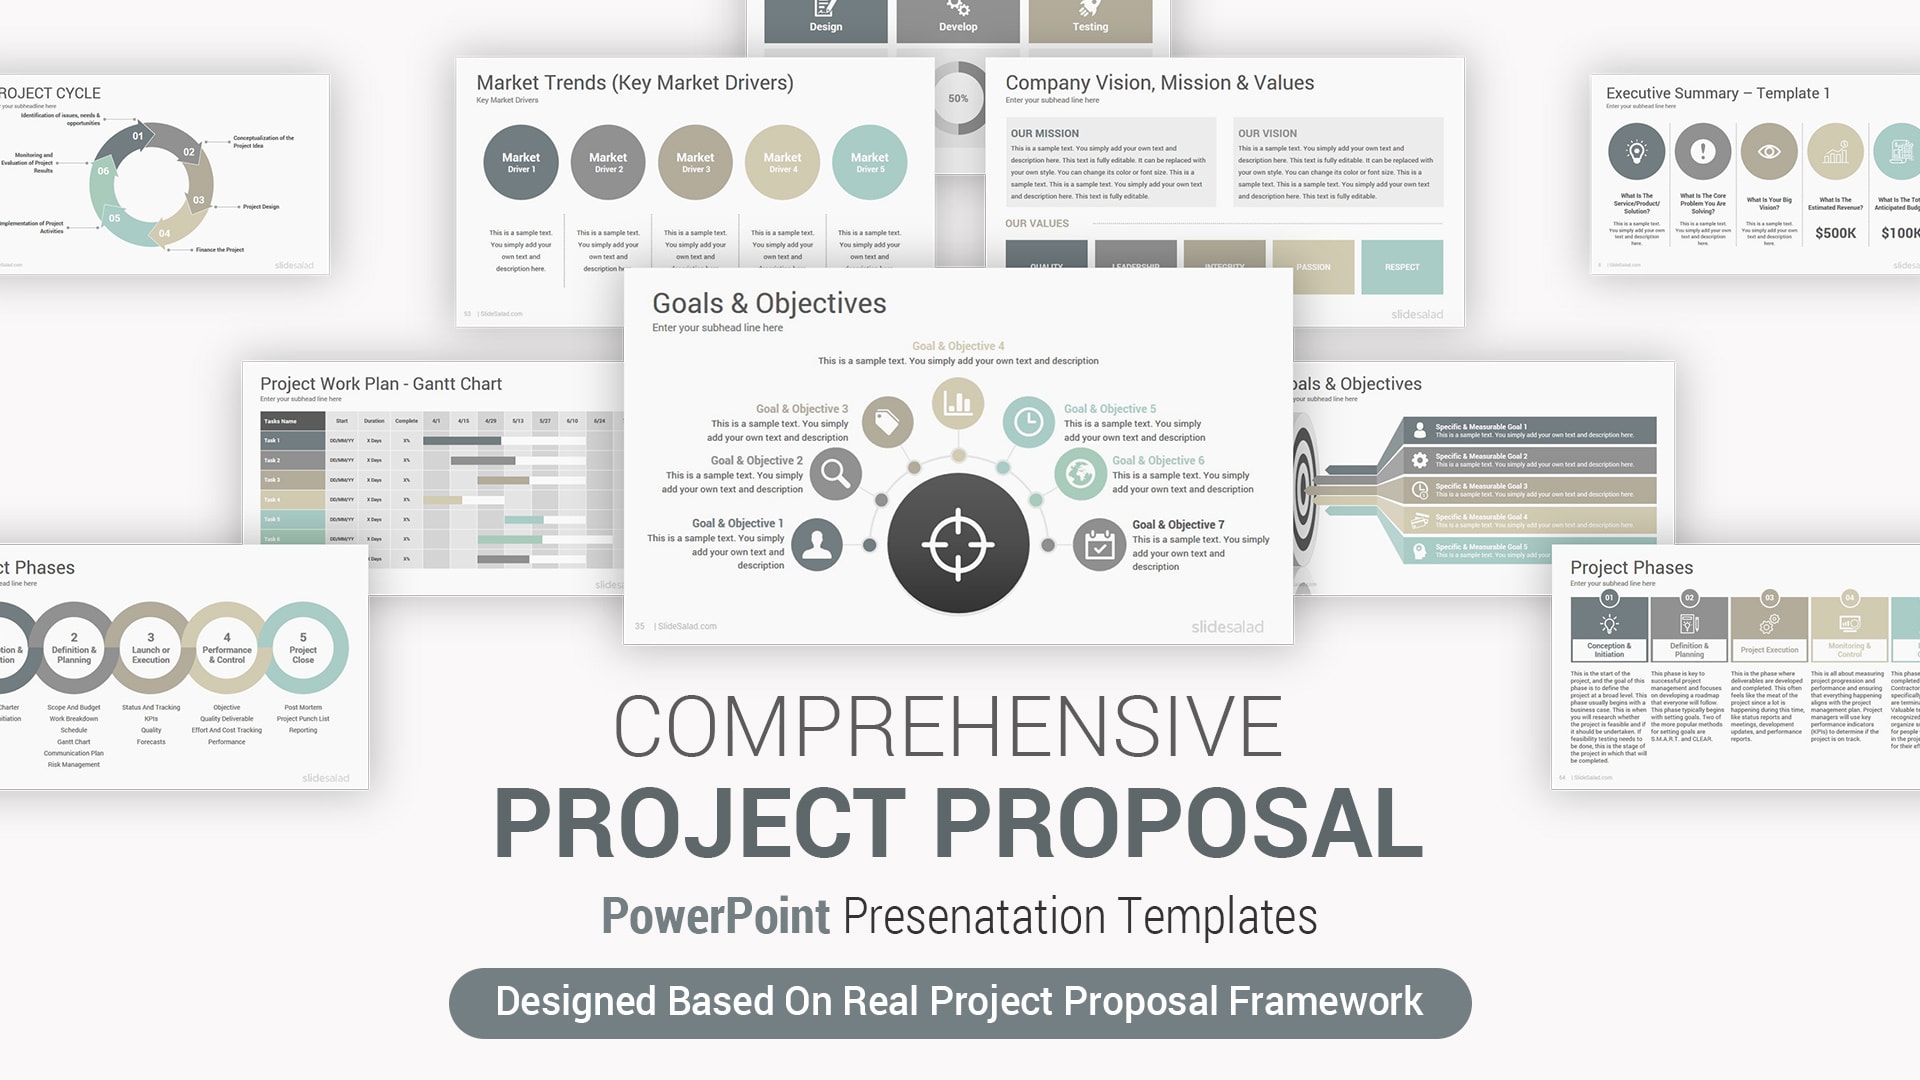 Best Project Proposal PowerPoint Template – Best Example for Project Proposals